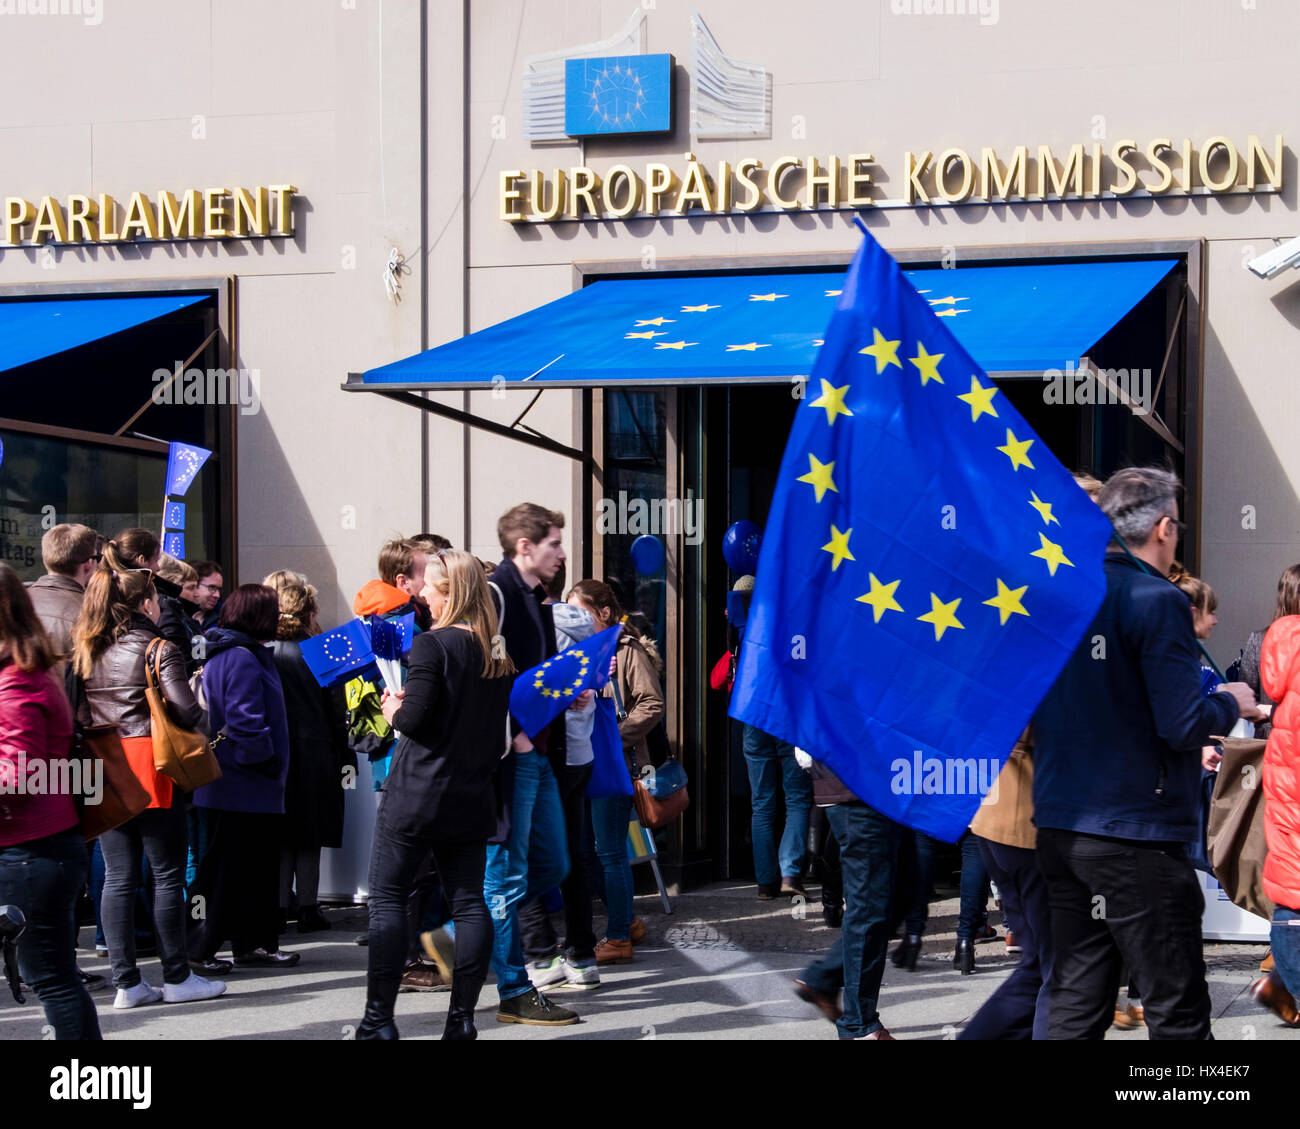 Brandenburg Gate, Berlin, Germany, 25th March 2017. The March for Europe in Berlin. People gathered at the Brandenburg Gate to celebrate the 60th Anniversary of the European Union. Calls were made for a unified Europe and British citizens  protested against the imminent Brexit.  Eden Breitz/Live News Alamy Stock Photo